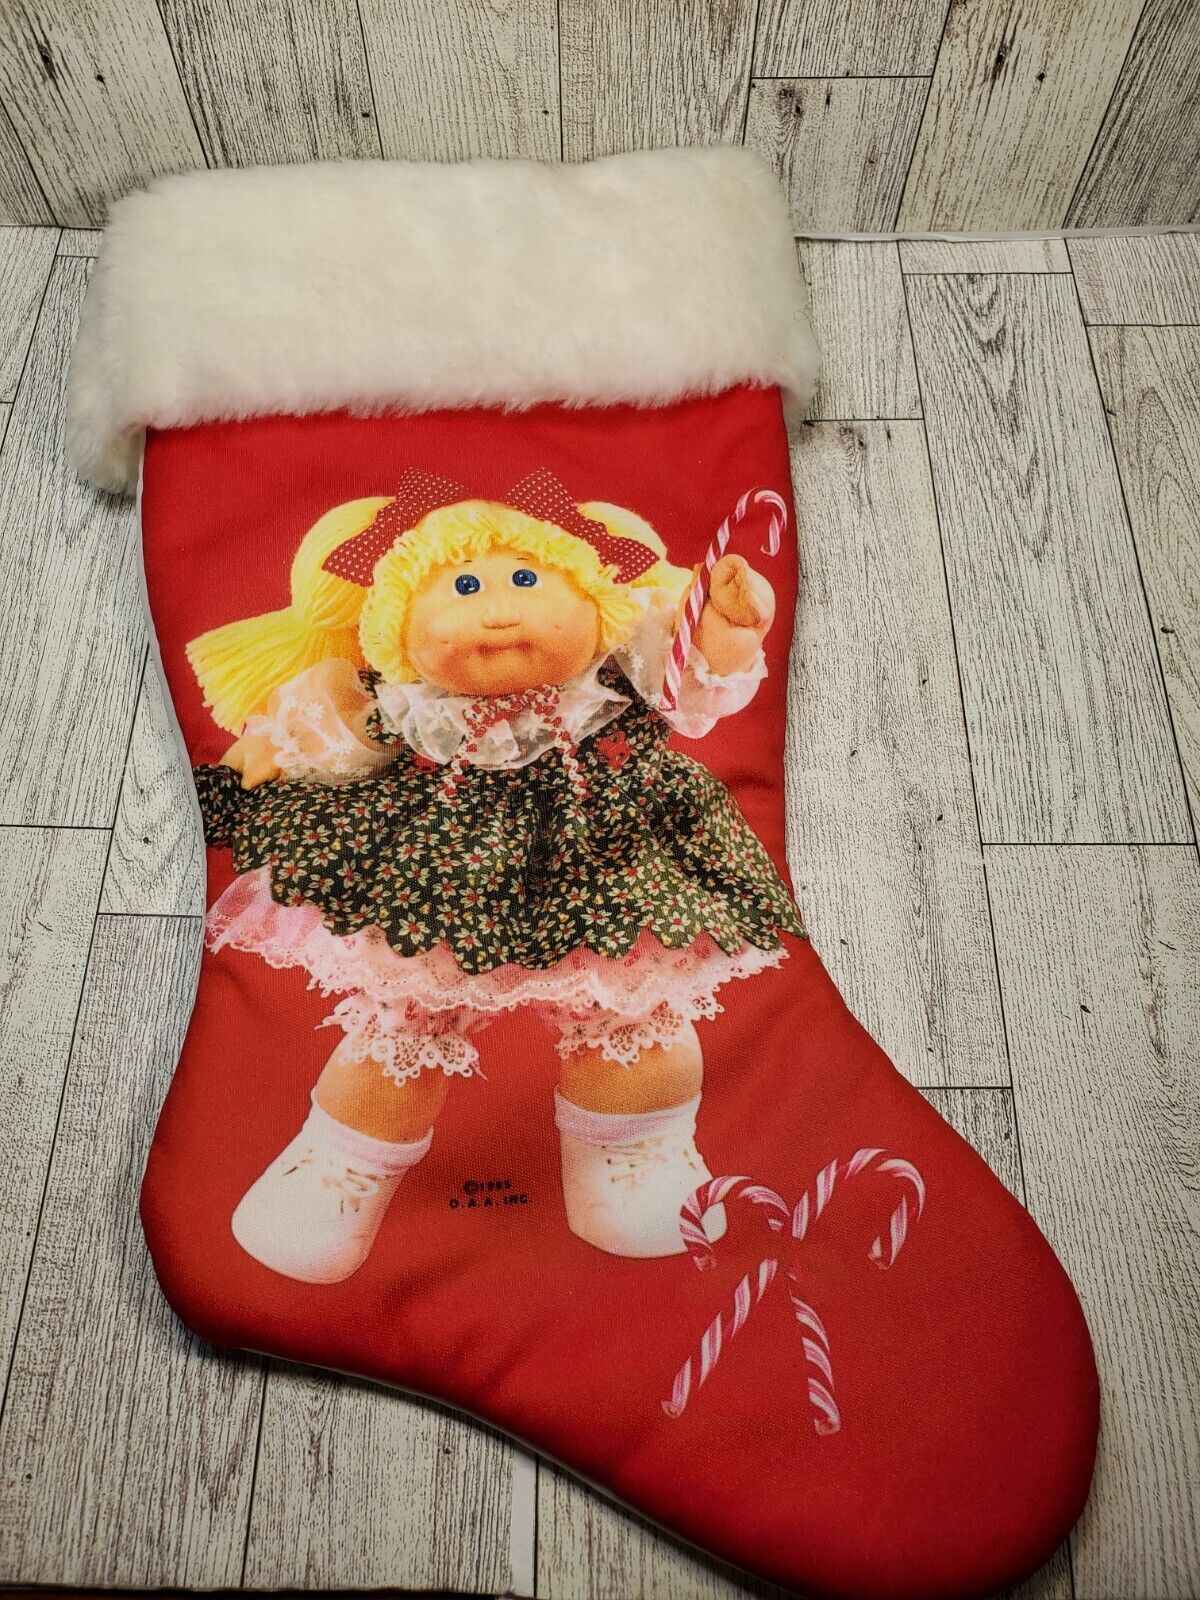 Vintage Rare Cabbage Patch Kids 1985 Christmas Stocking  Blonde Girl Candy Cane